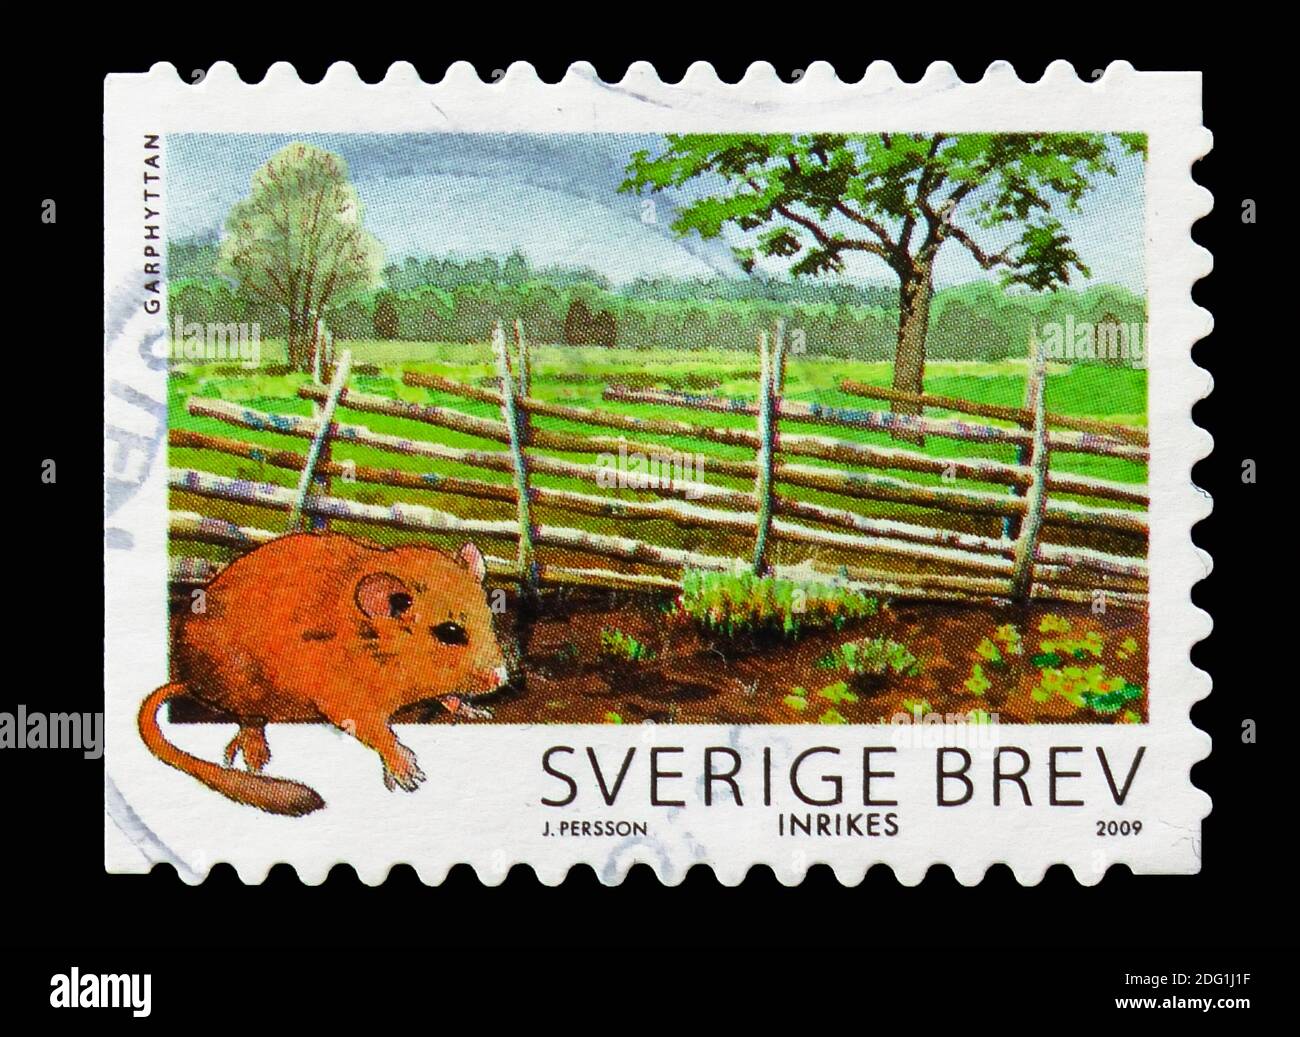 MOSCOW, RUSSIA - AUGUST 18, 2018: A stamp printed in Sweden shows Common Dormouse (Muscardinus avellanarius), Garphyttan NP, National Parksserie, circ Stock Photo